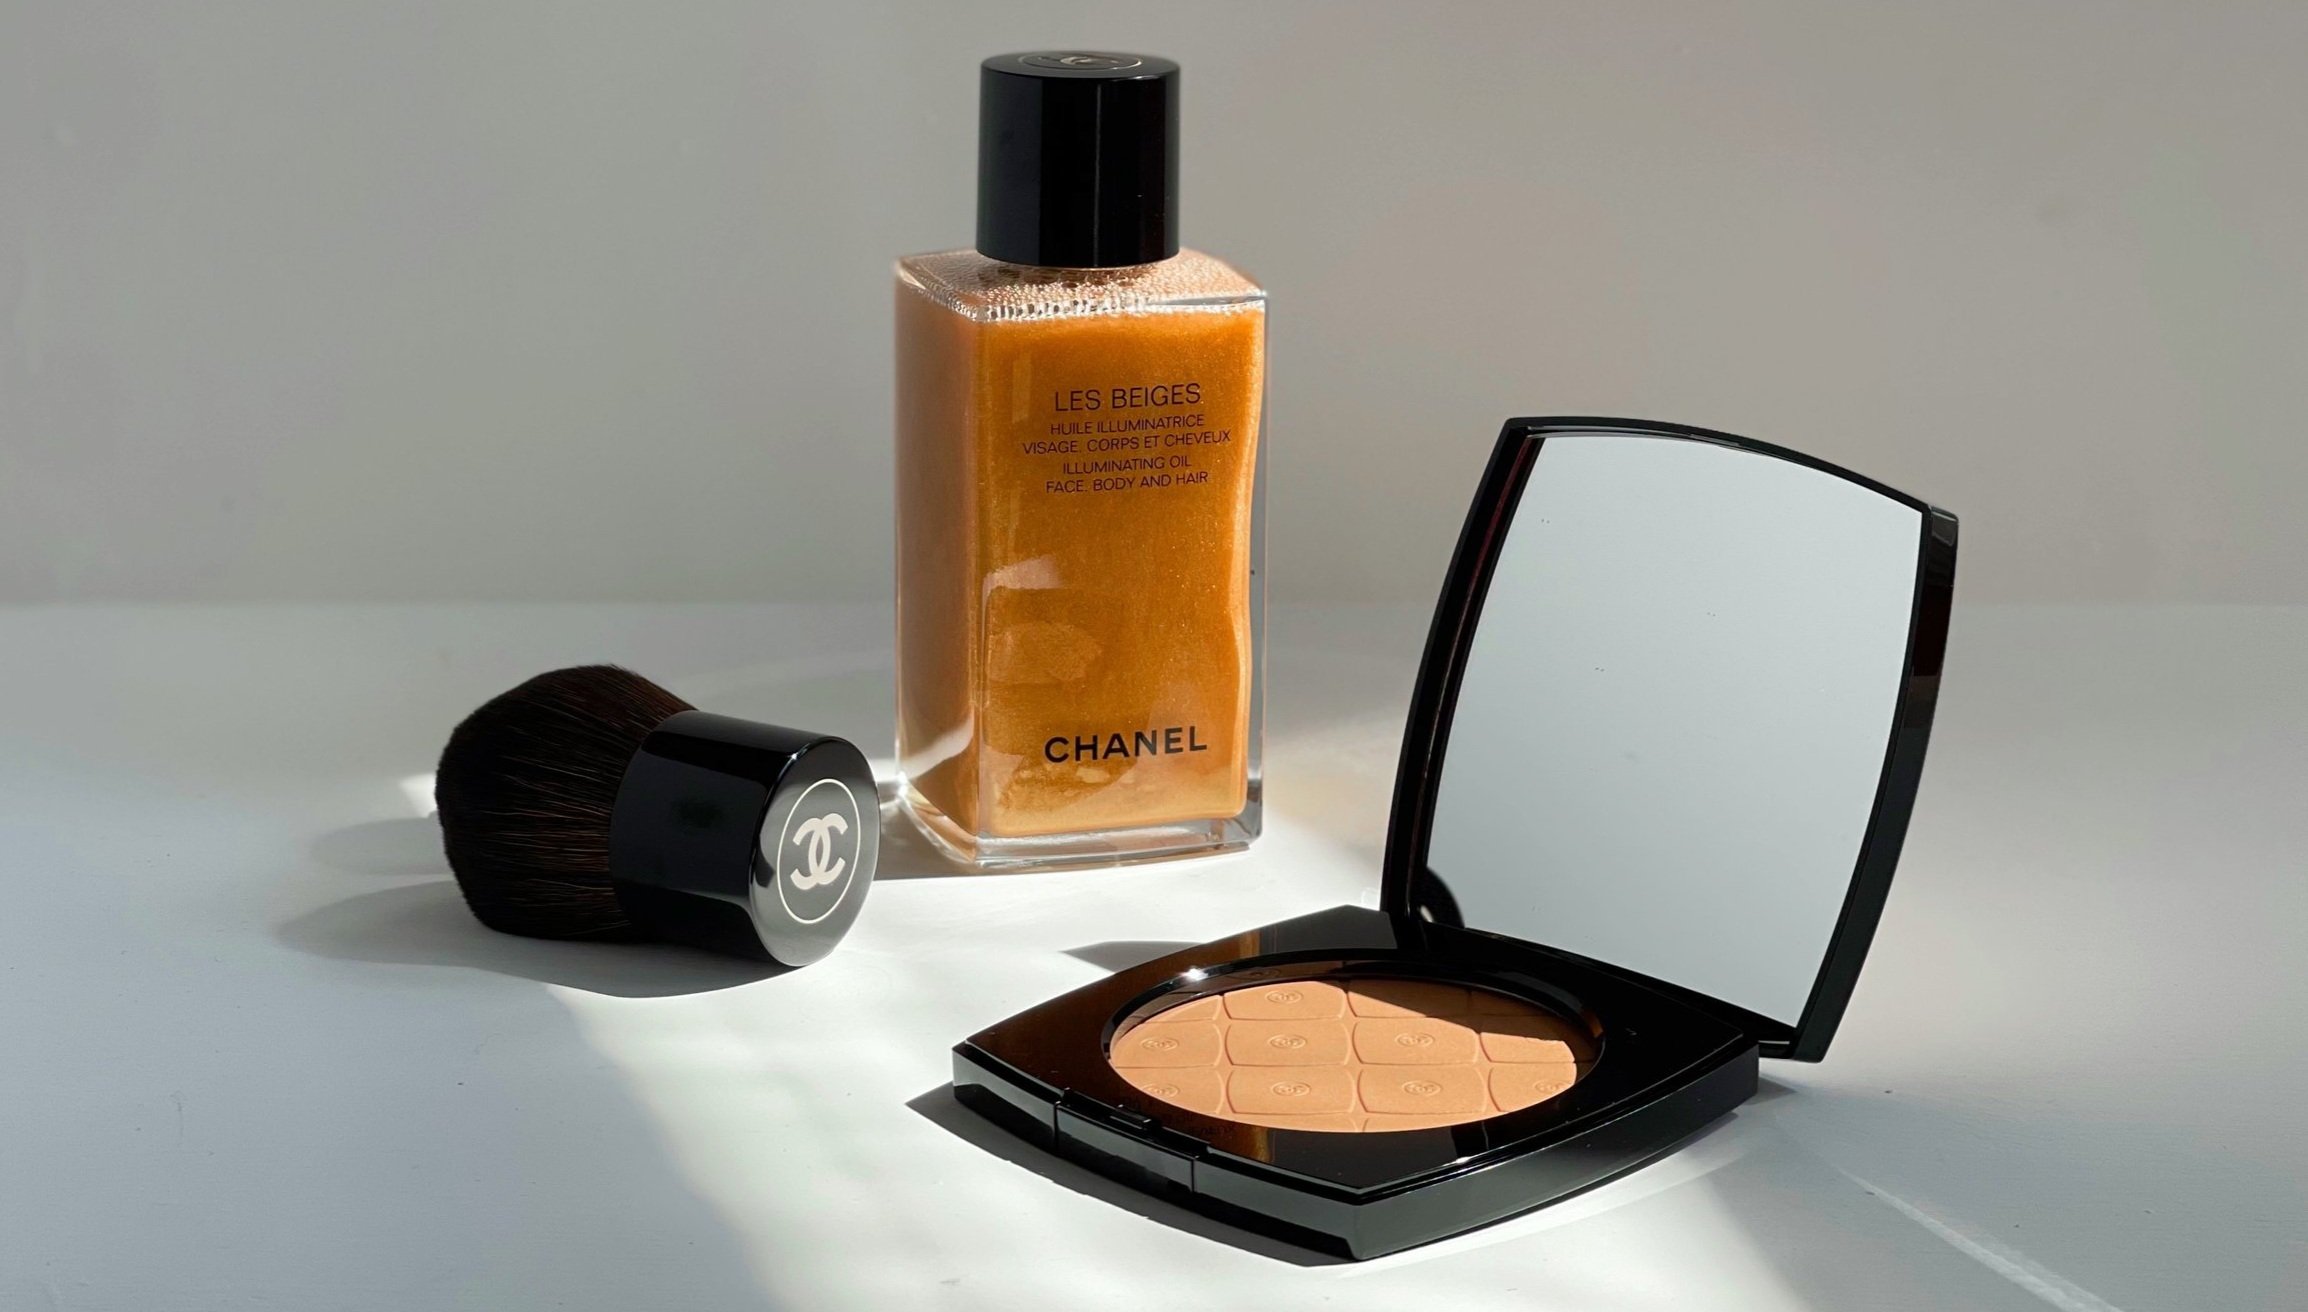 New Chanel Les Beiges Summer 2022 Oversized Healthy Glow Sun